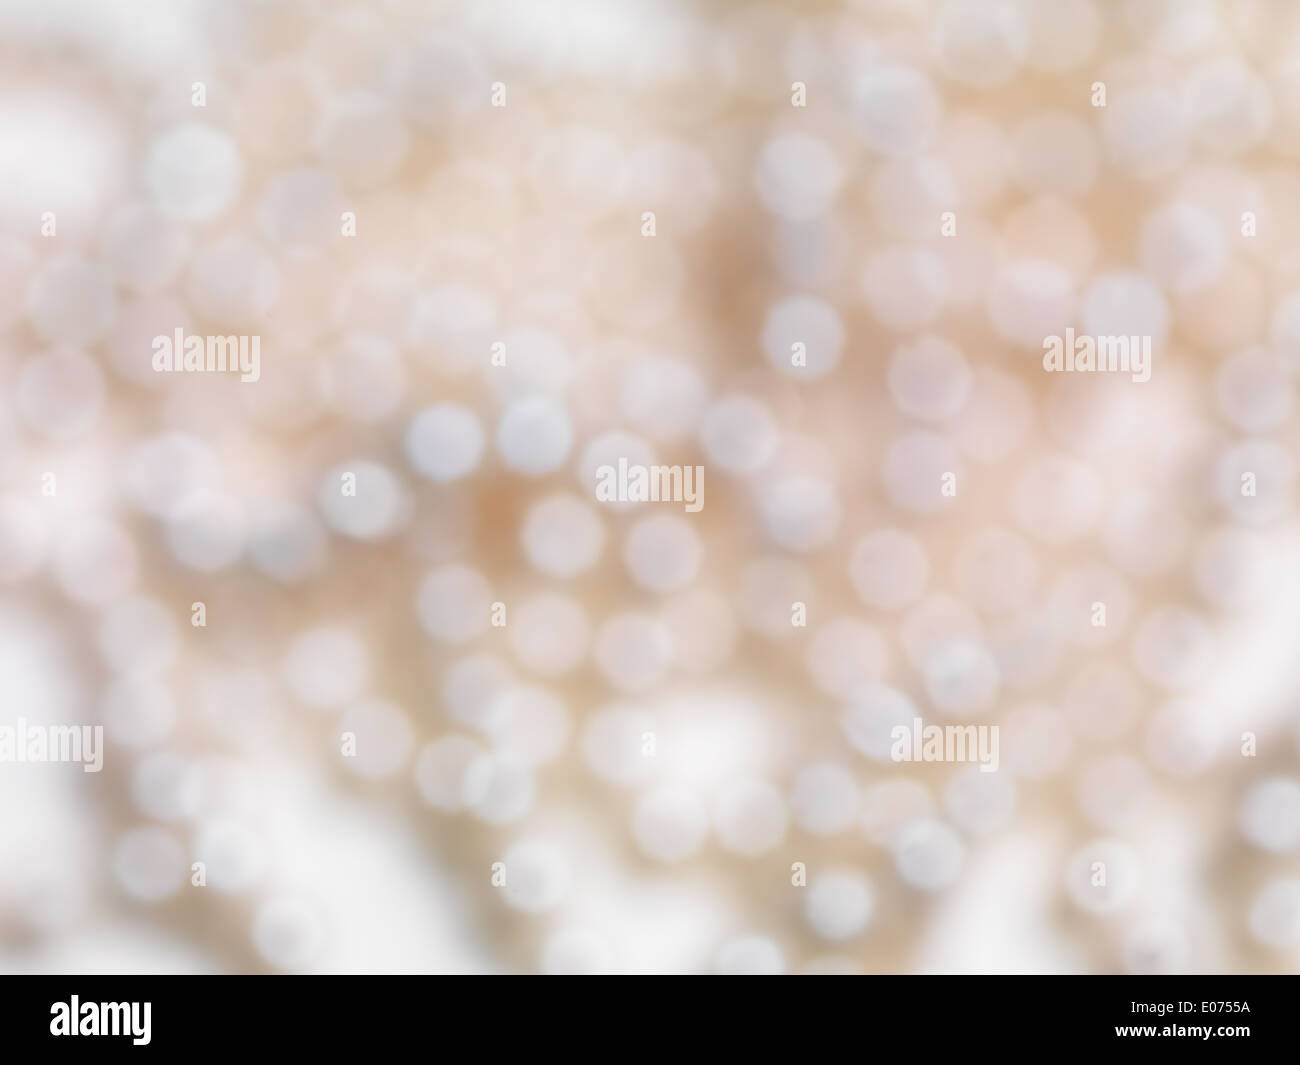 Abstract beige shiny blurred out of focus background texture Stock Photo